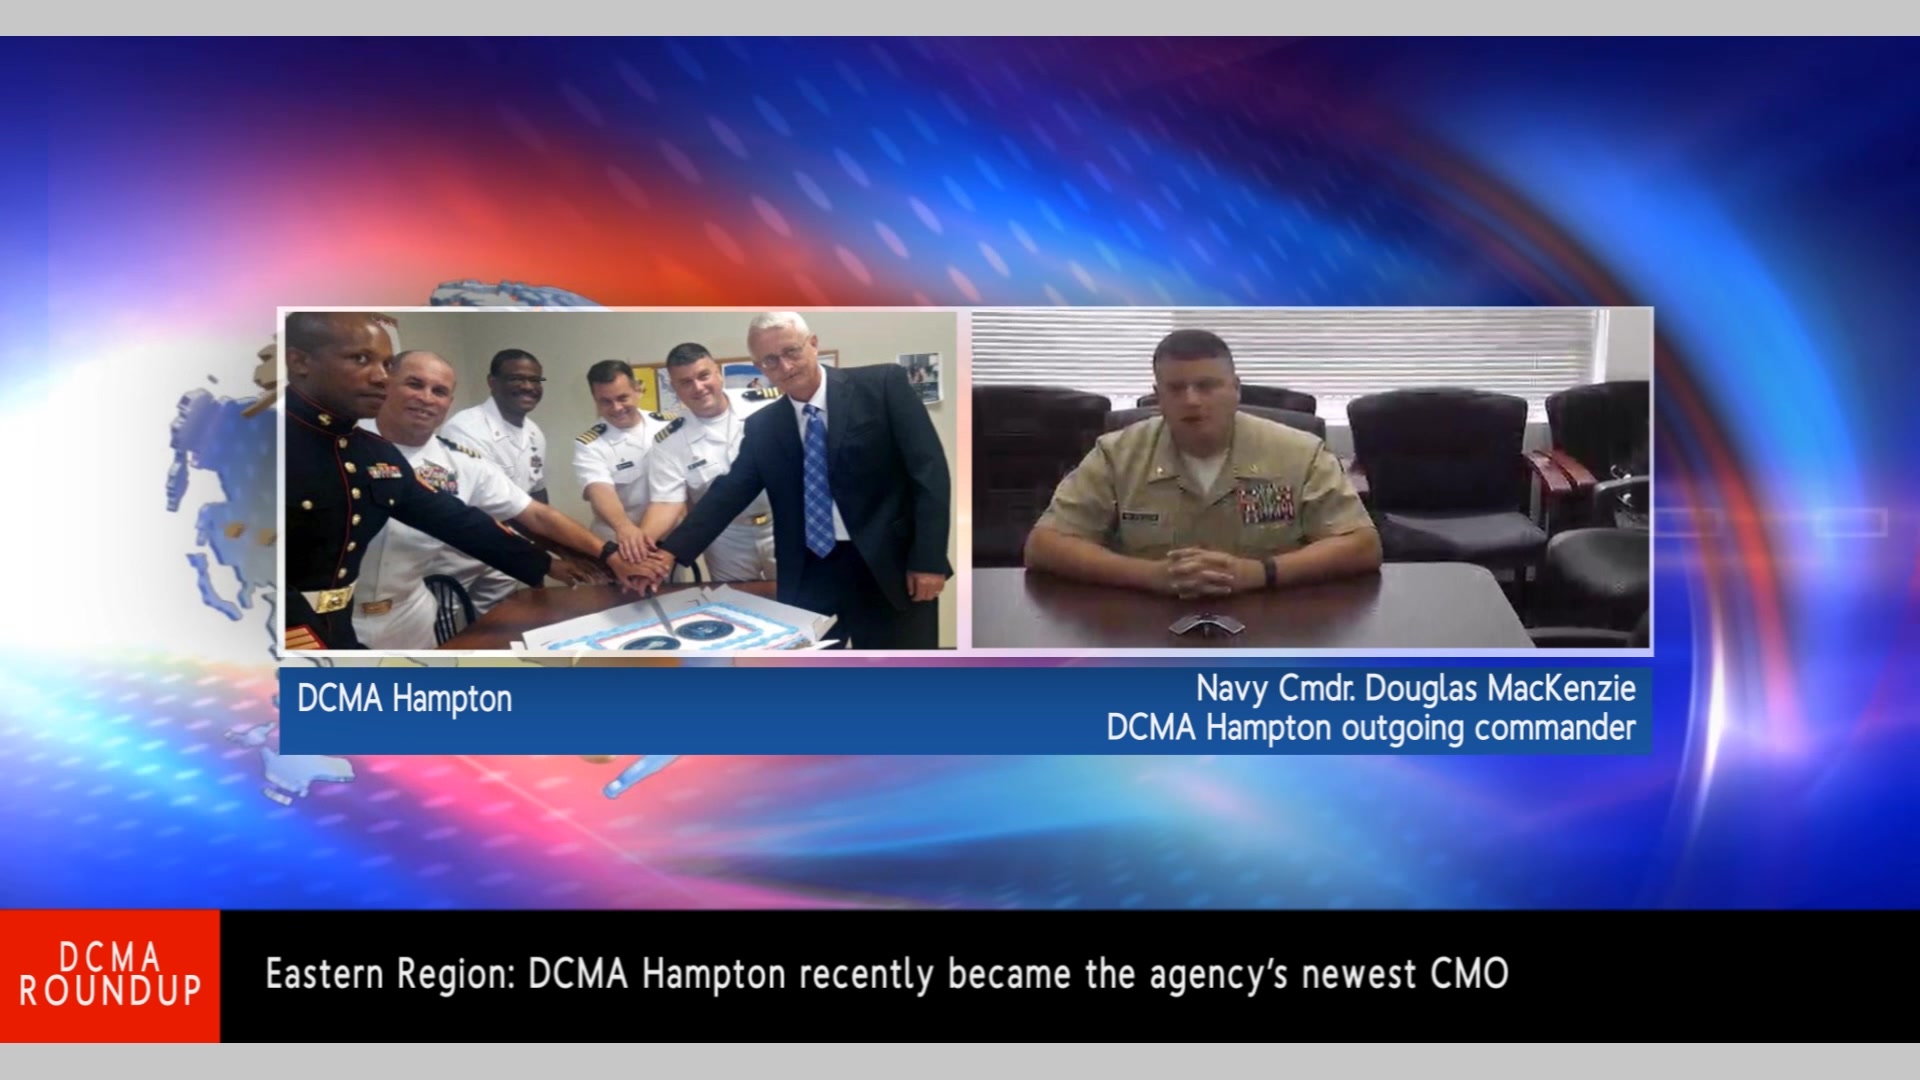 A monthly recap of events that occurred throughout the Defense Contract Management Agency (DCMA).